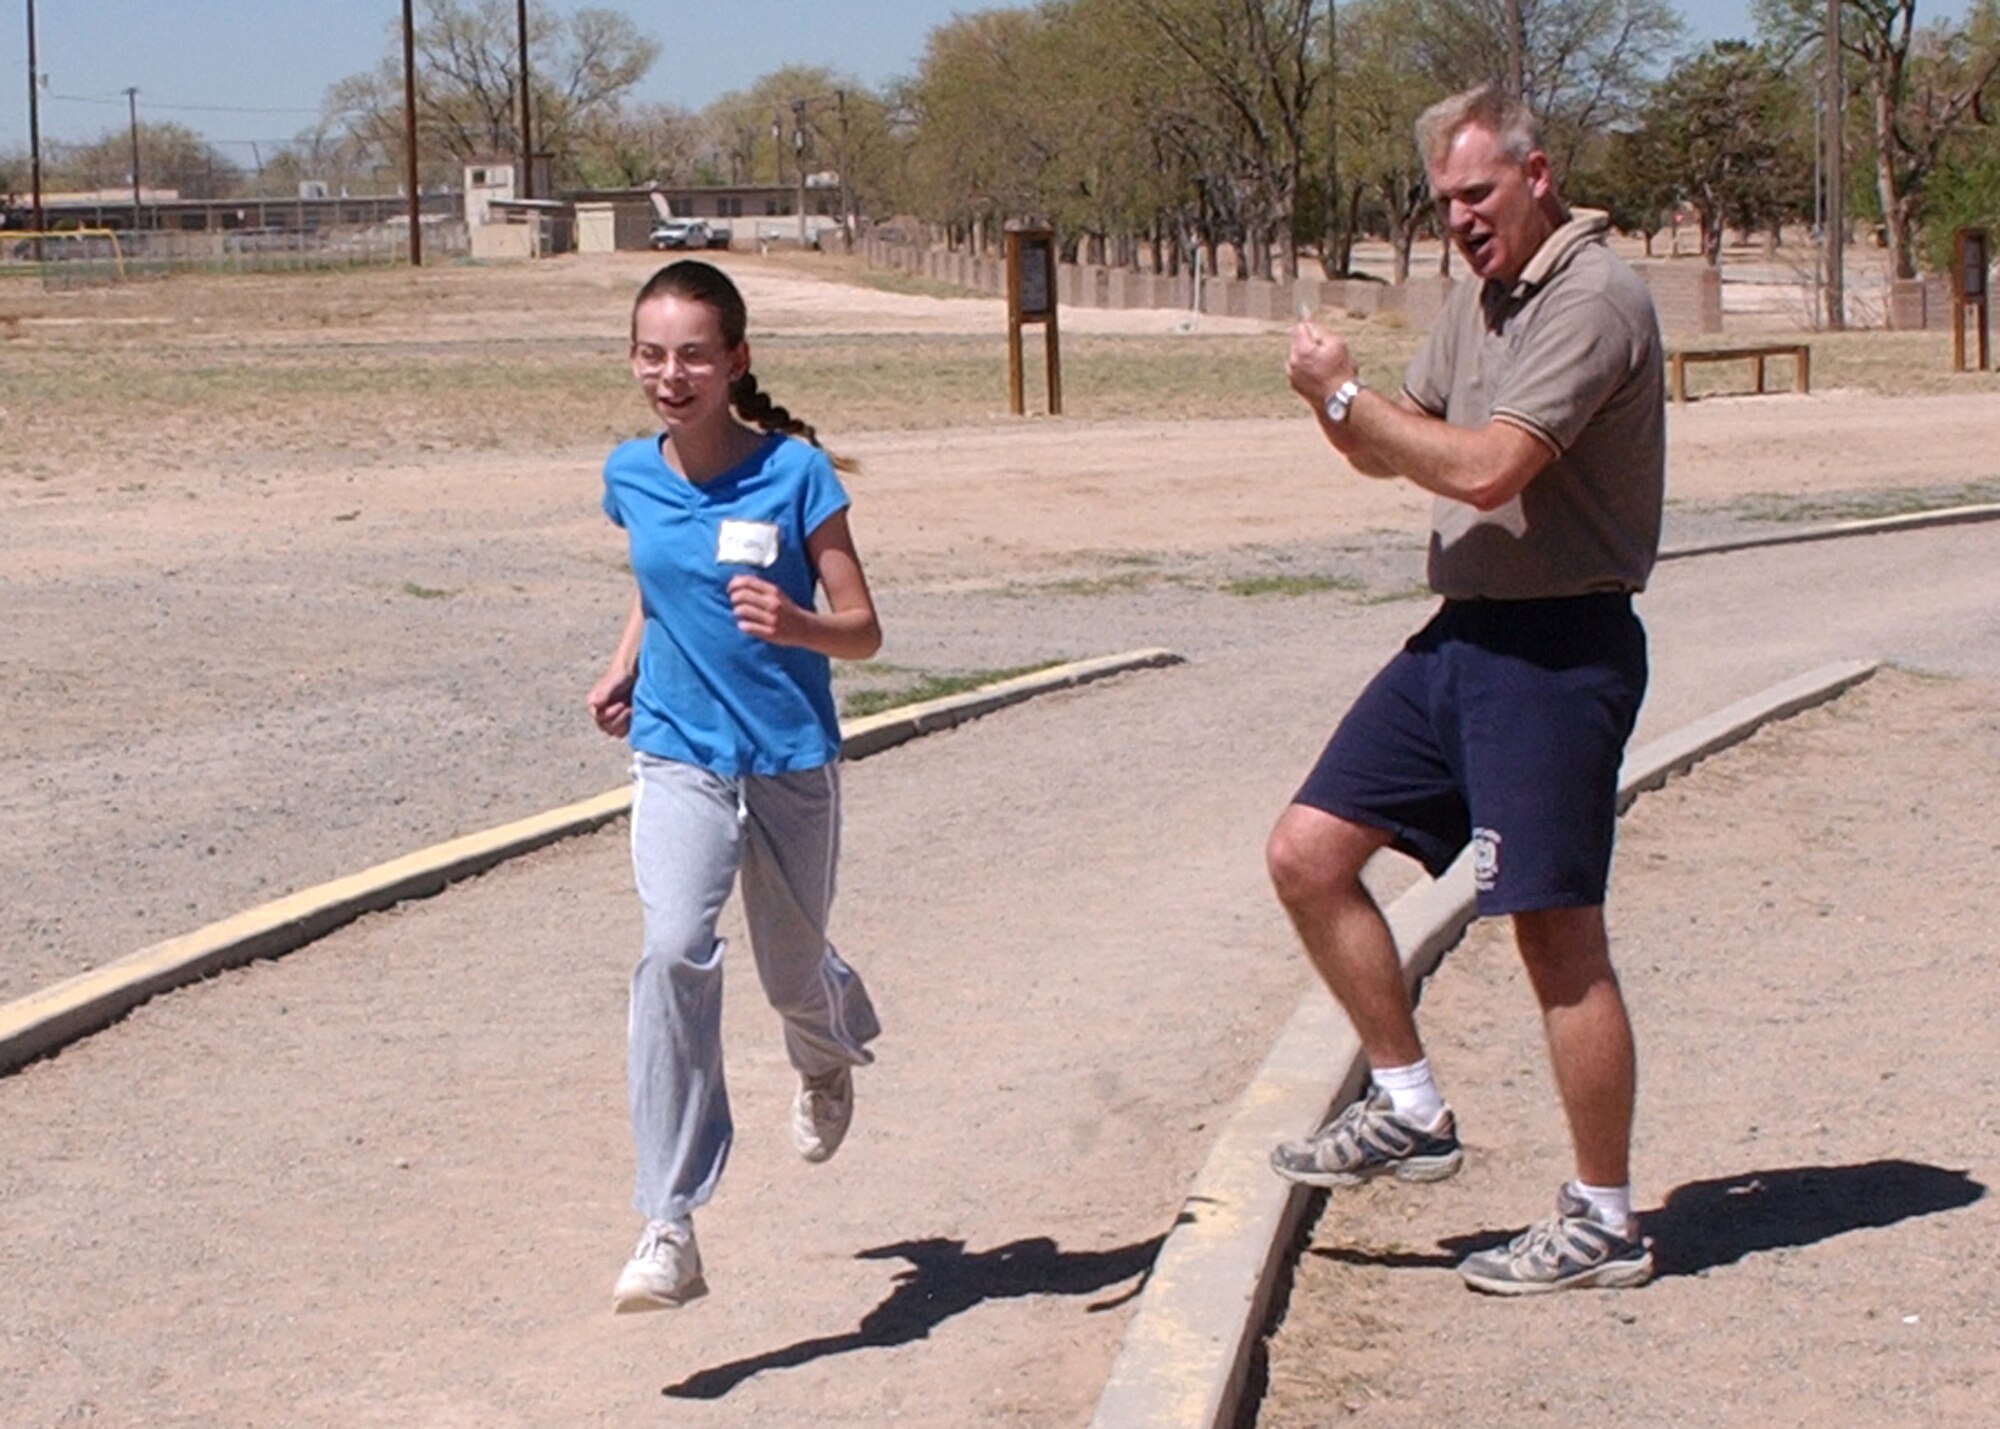 KIRTLAND AIR FORCE BASE, N.M. - Tech. Sgt. Matt Moore of Kirtland's NCO Academy, cheers Megan Norris along during her mile run. Megan ran the fastest girl's time at the event in approximately 7 minutes. (Air Force photo by Dennis Carlson)          